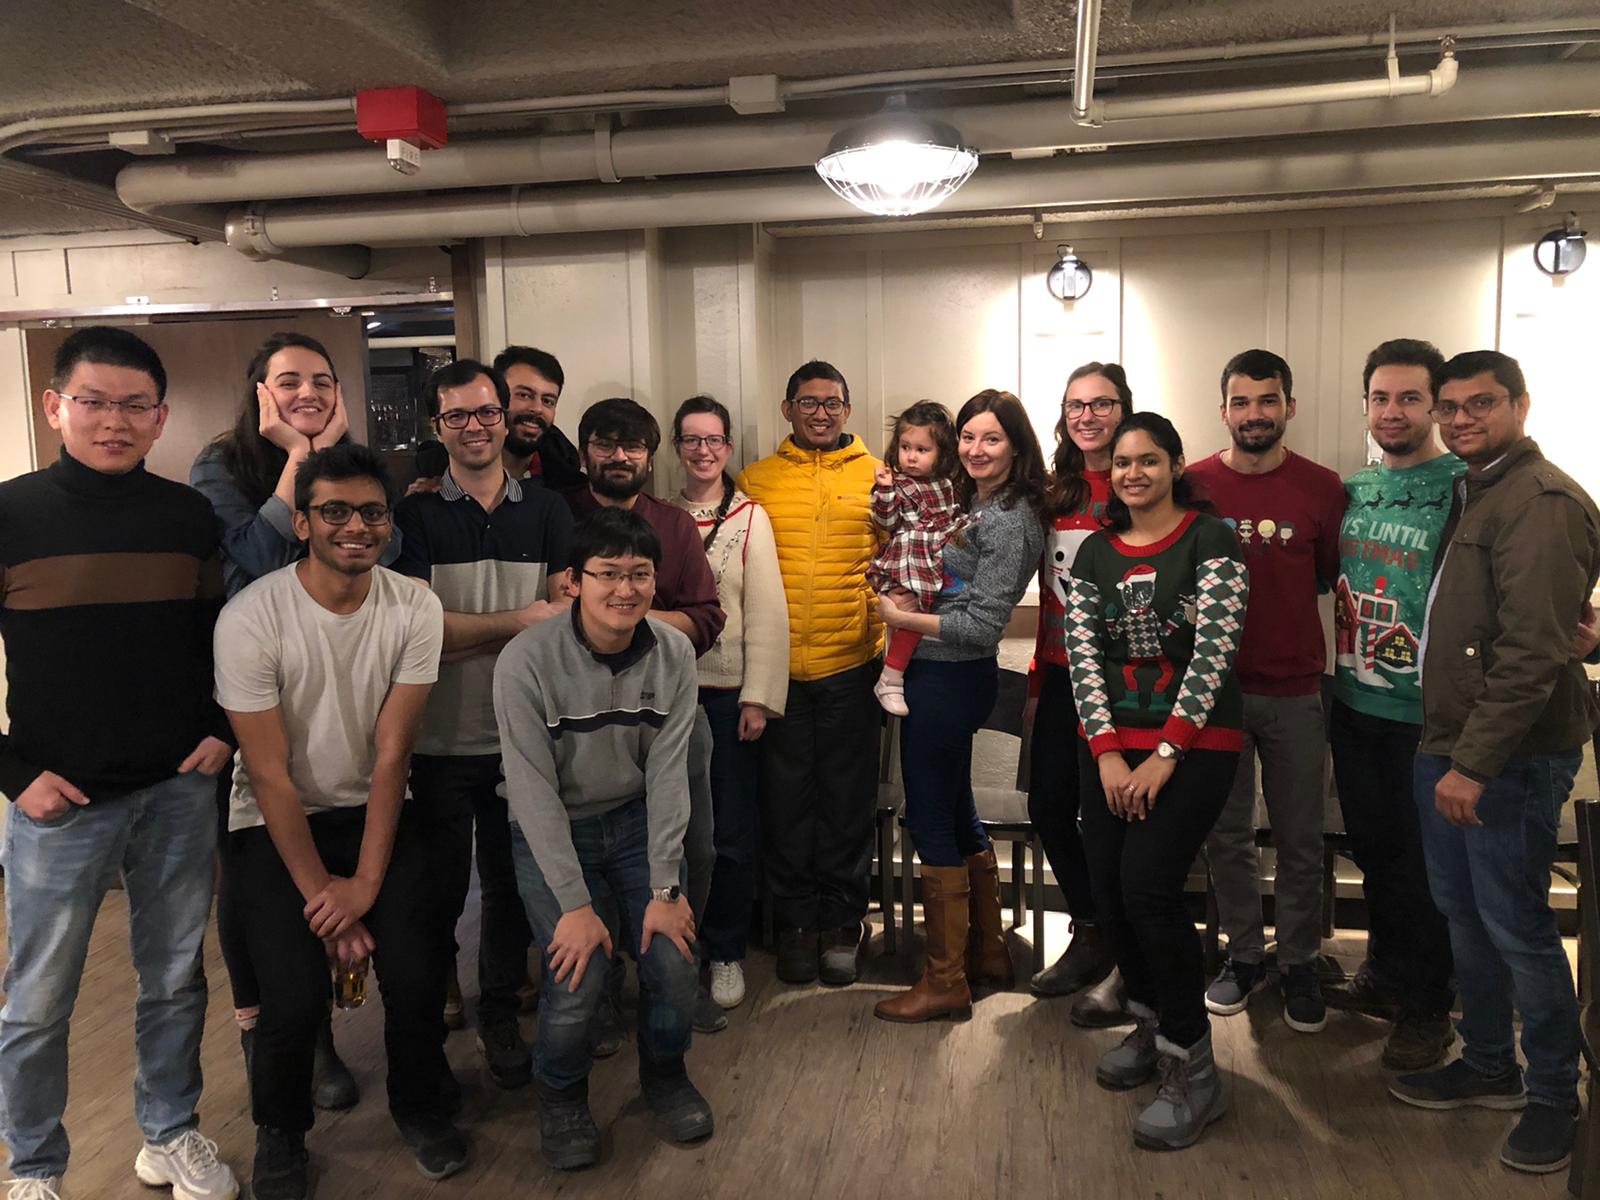 The ugly sweater christmas party - 2019